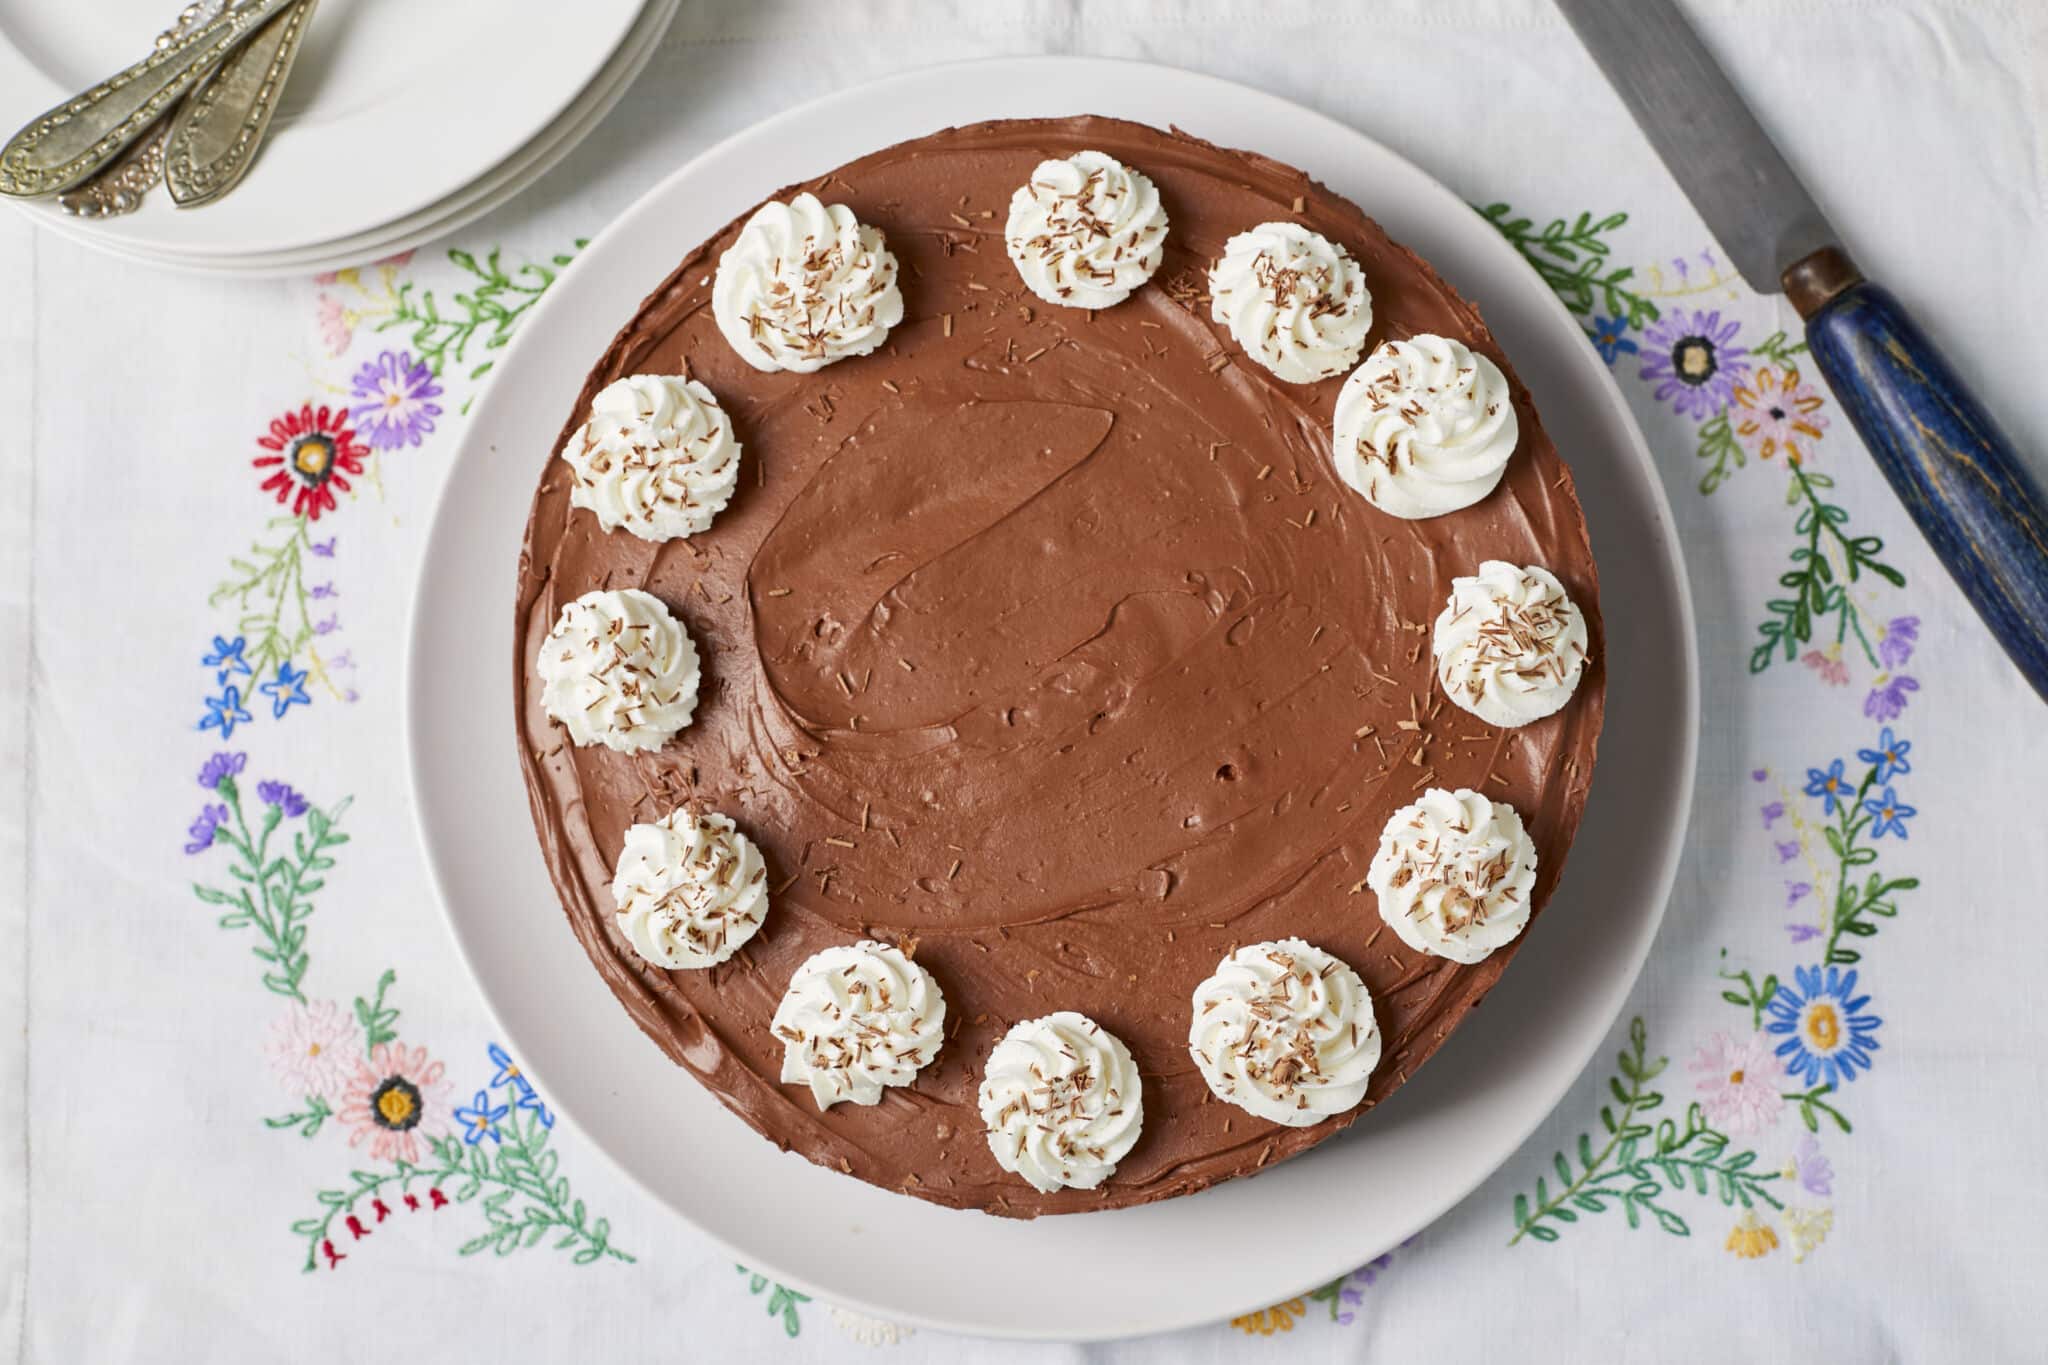 Extremely rich, decadent, and smooth No-Bake Chocolate Cheesecake is served on a white plate topped with whipped cream rosette and chocolate shavings.